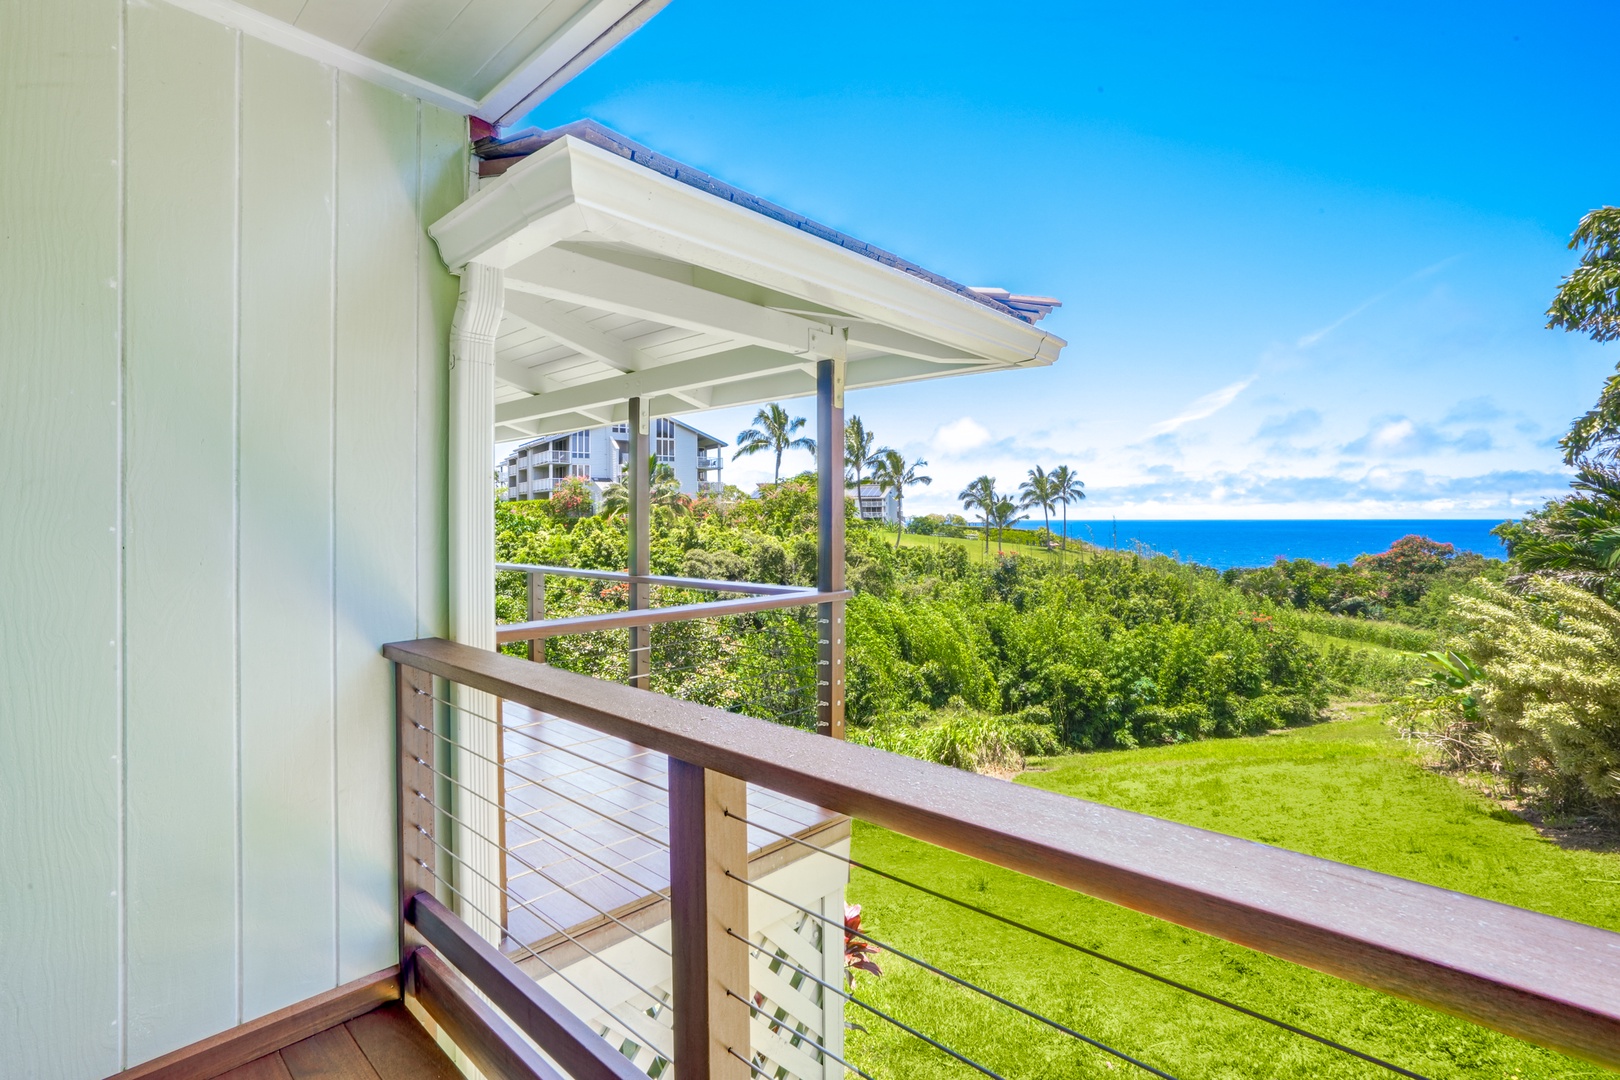 Princeville Vacation Rentals, Wai Lani - Scenic balcony views at guest suite 3